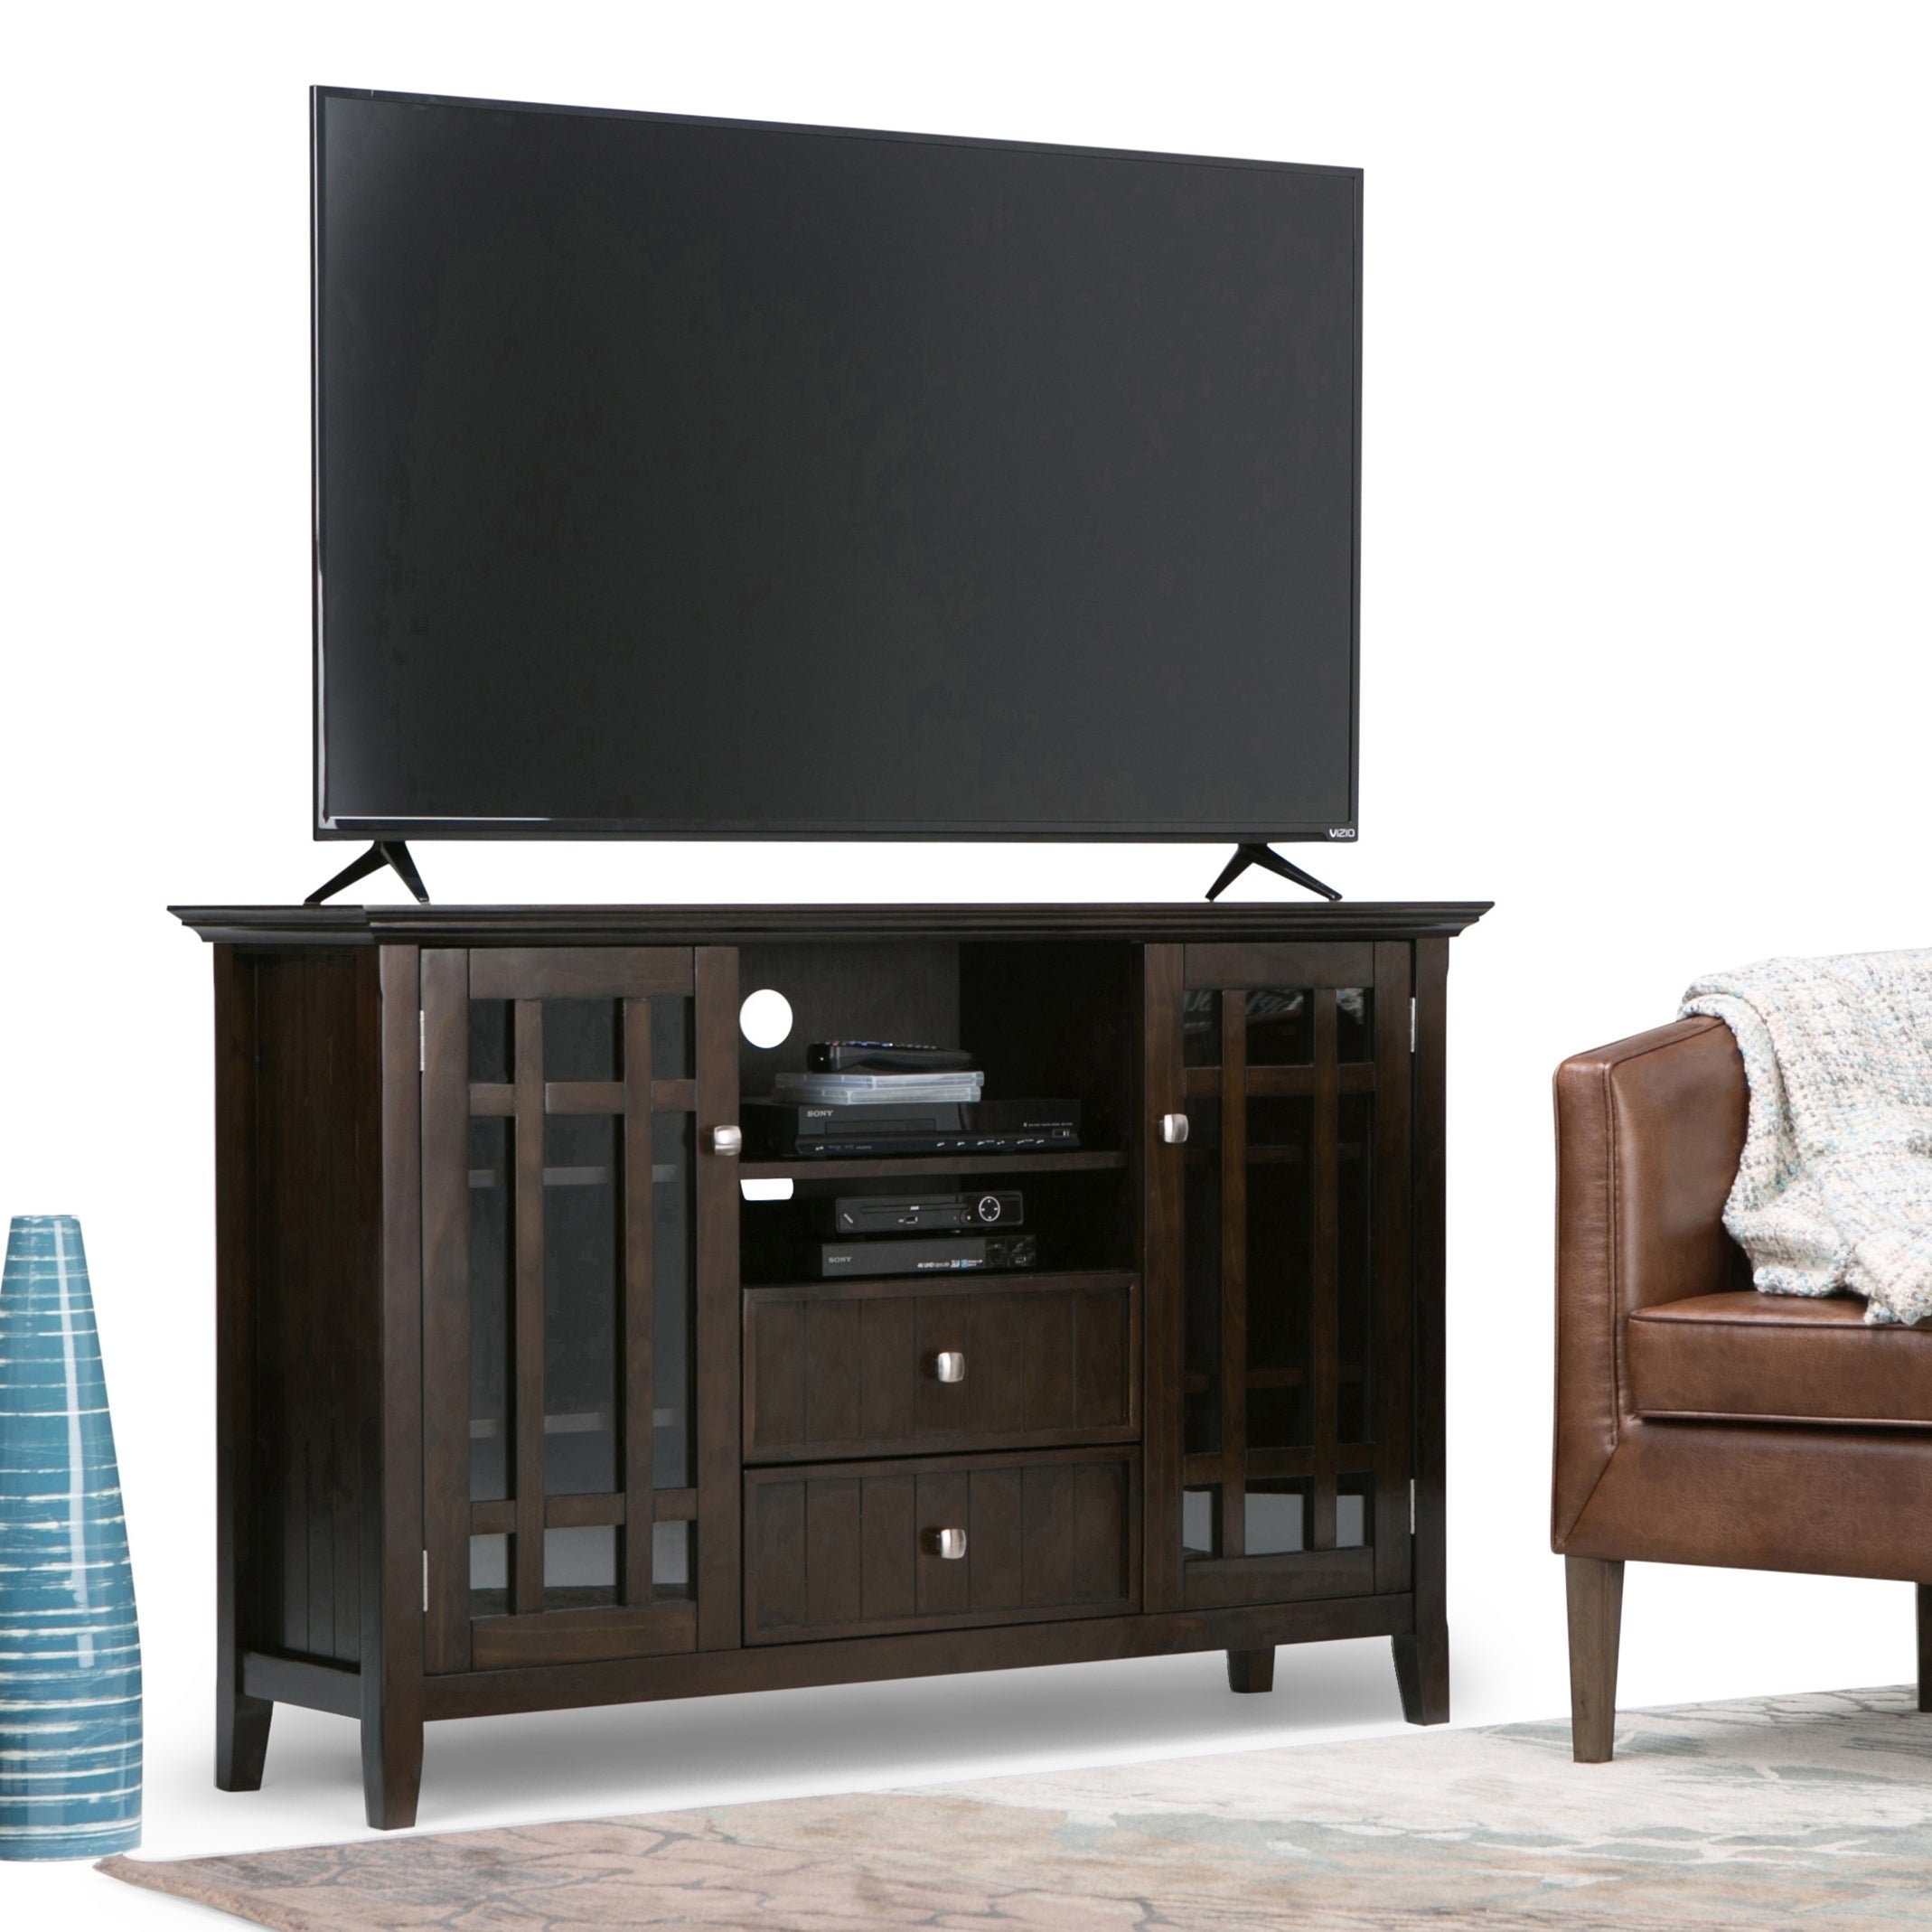 Overstock Fireplace Tv Stand Unique Overstock 39 S Medi – Luchainstitute